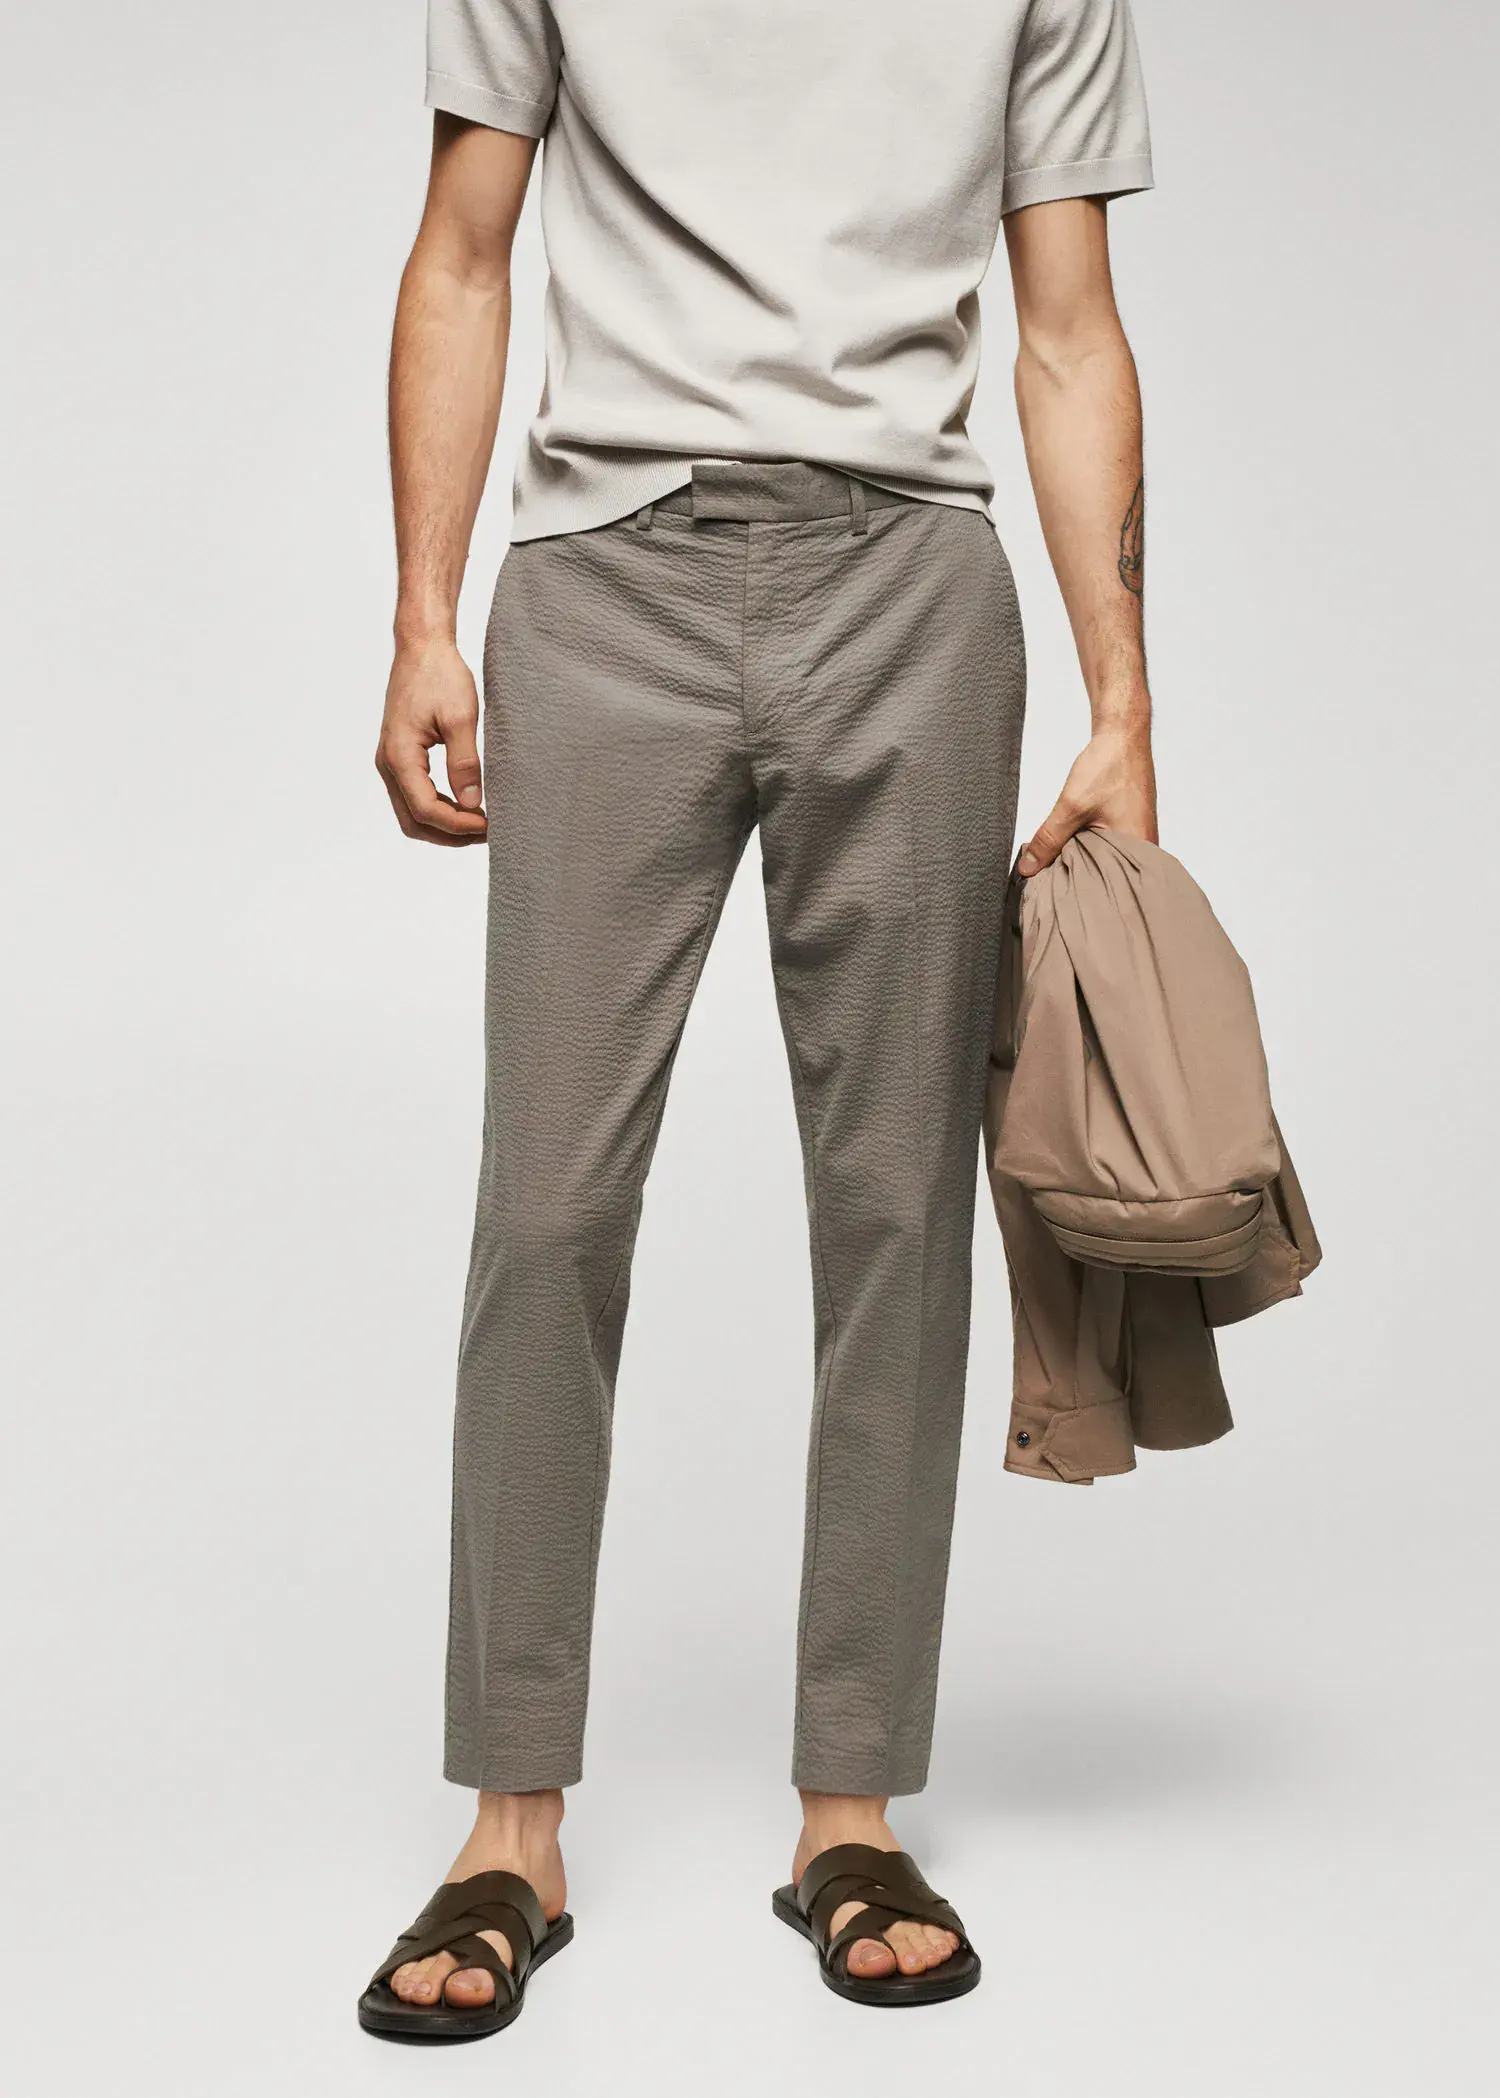 Mango Slim-fit seersucker stretch pants. a man holding a backpack while standing in front of a wall. 